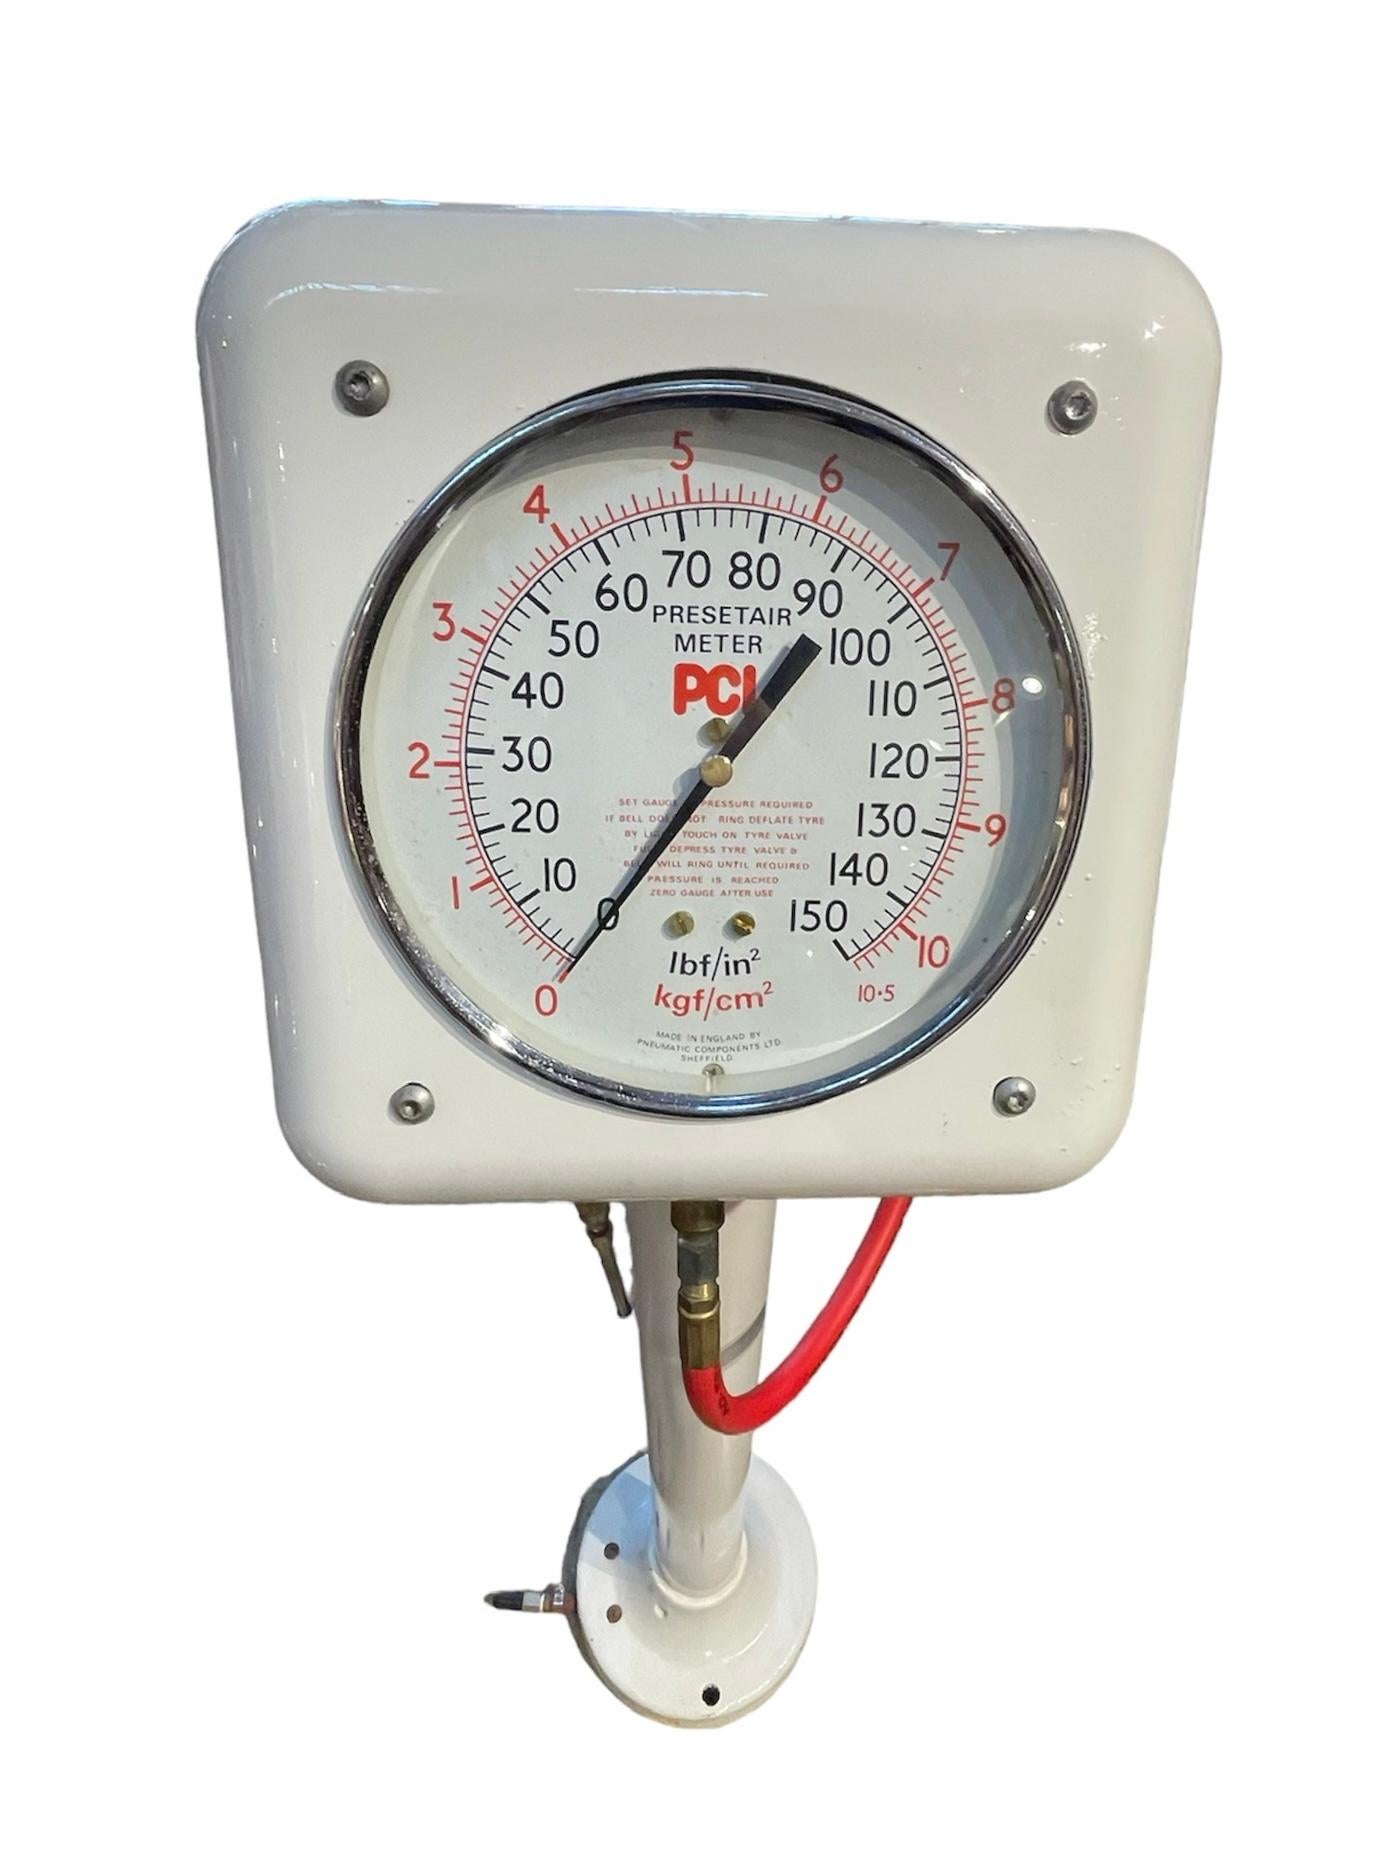 This is a PCL Preset Air meter pedestal mounted. It is painted white and has a red  air hose. It meters the air. The hose can be hanged in a hook in the back. It provides automatically inflated balanced tire pressures against a precision- master